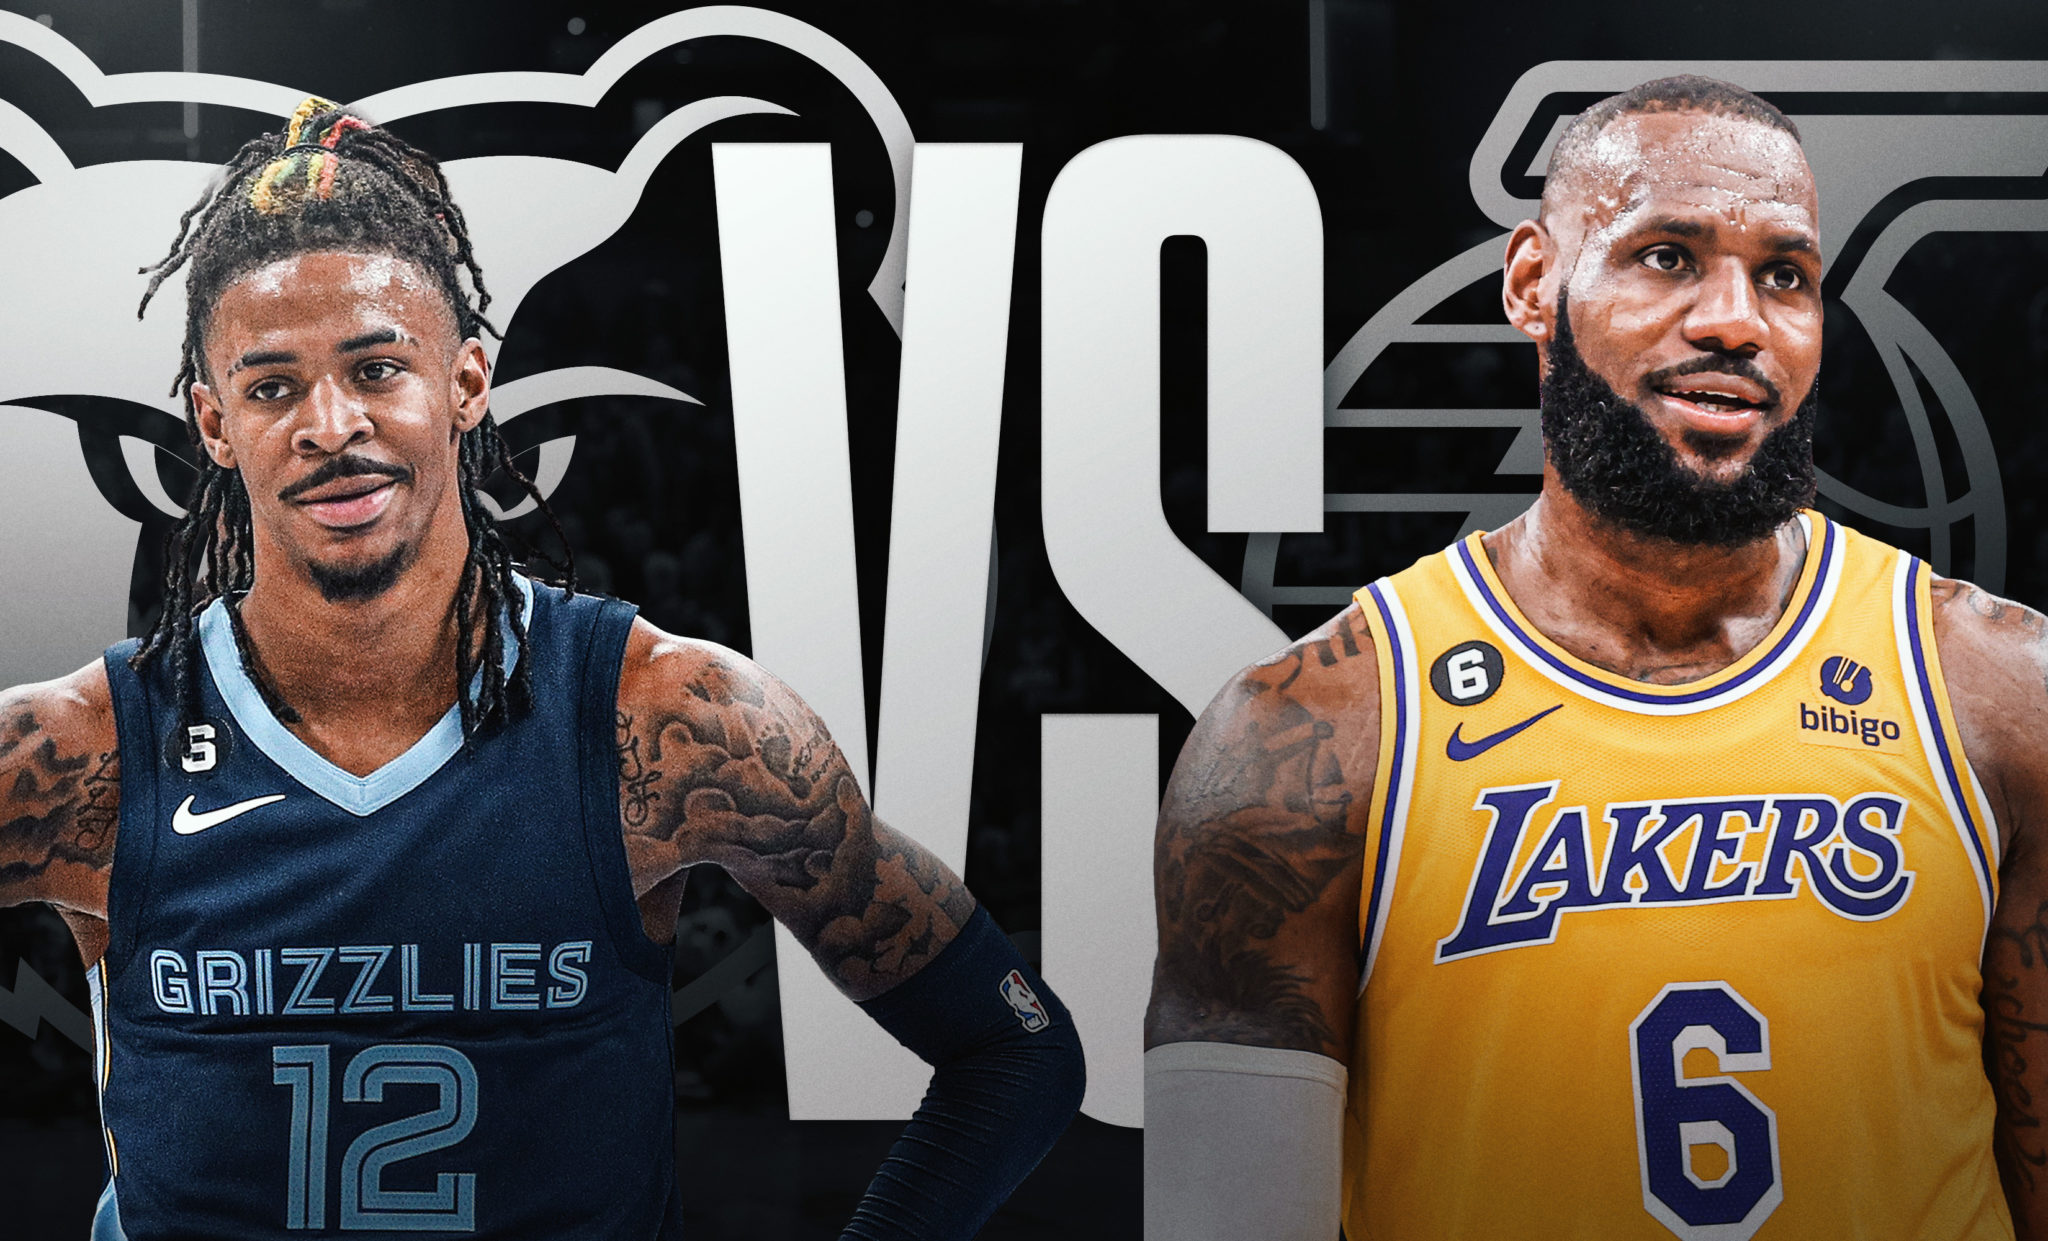 Lakers LEAD 2-1: Lakers vs. Grizzlies Game 4 Playoff Preview, Odds & Predictions